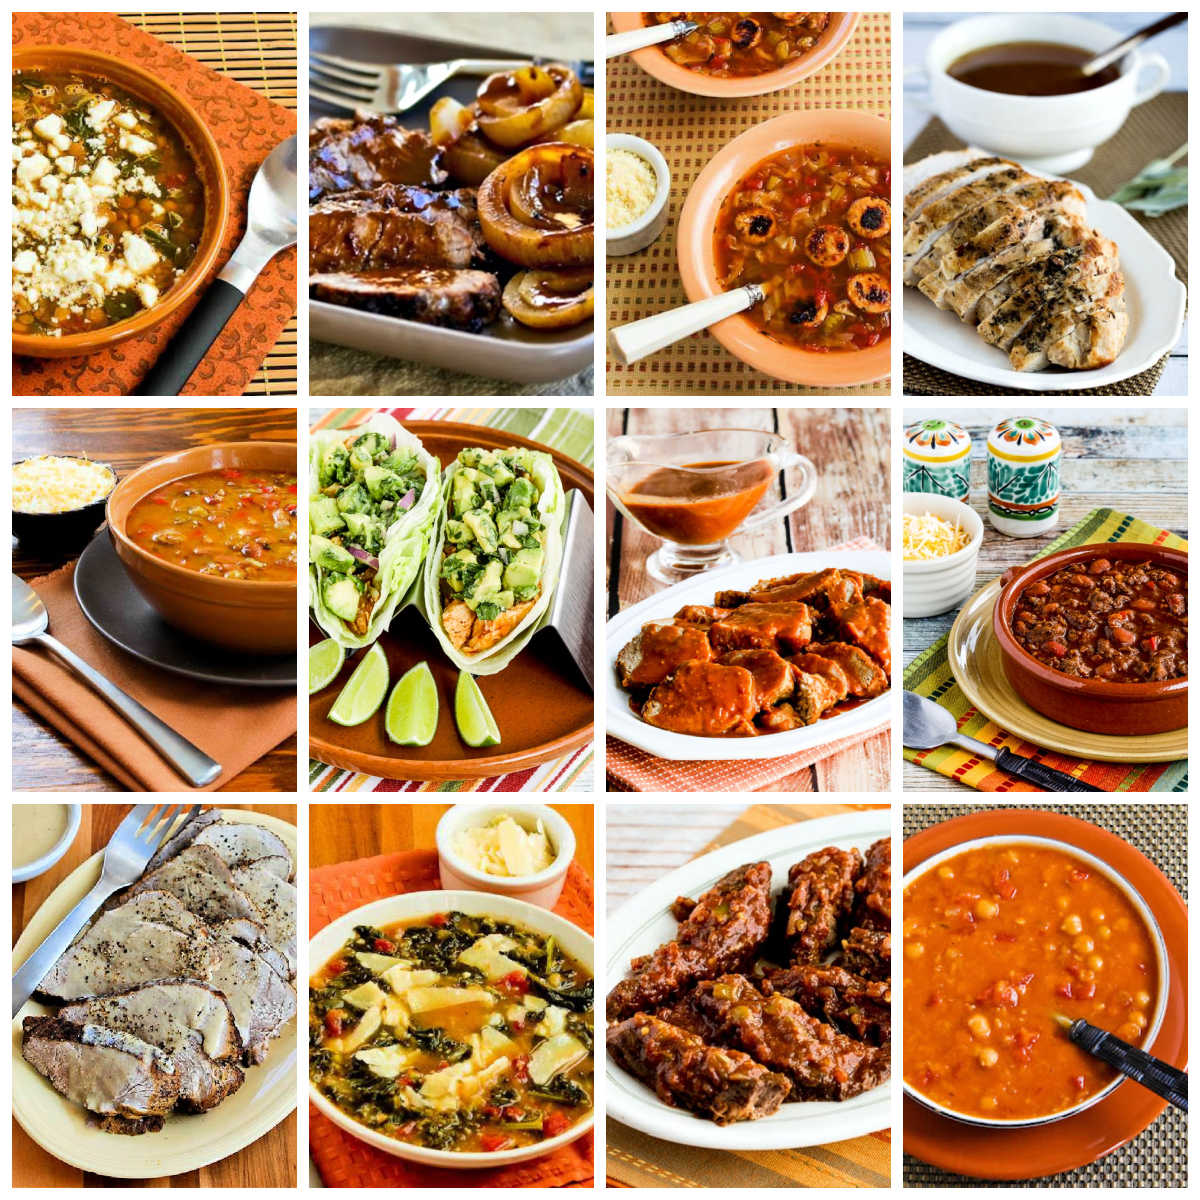 20 South Beach Diet Slow Cooker Recipes collage of featured recipes.